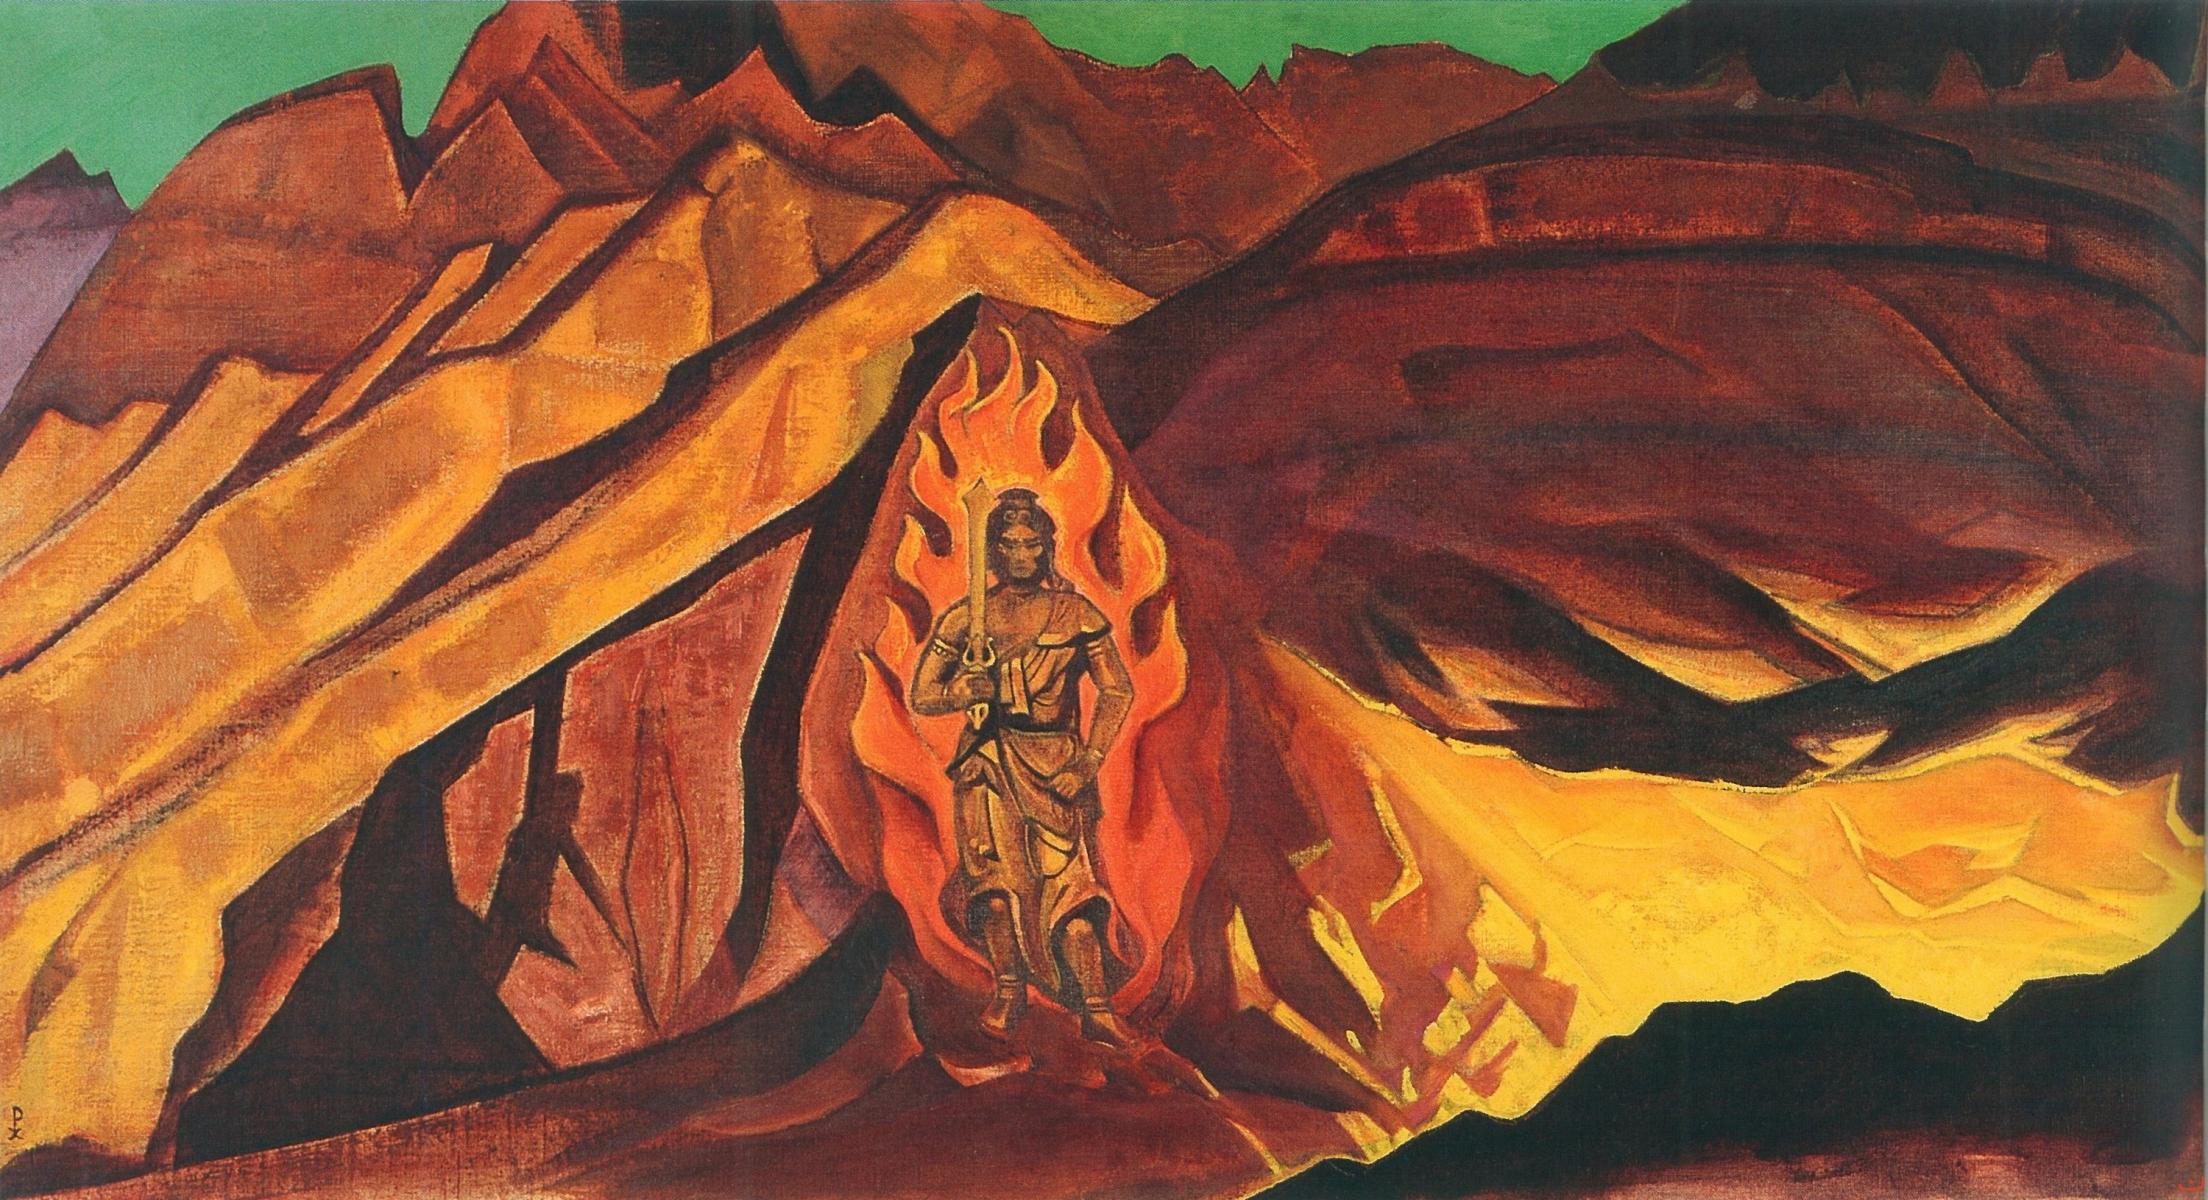 Guardian of the Entrance by Nicholas Roerich. 1927